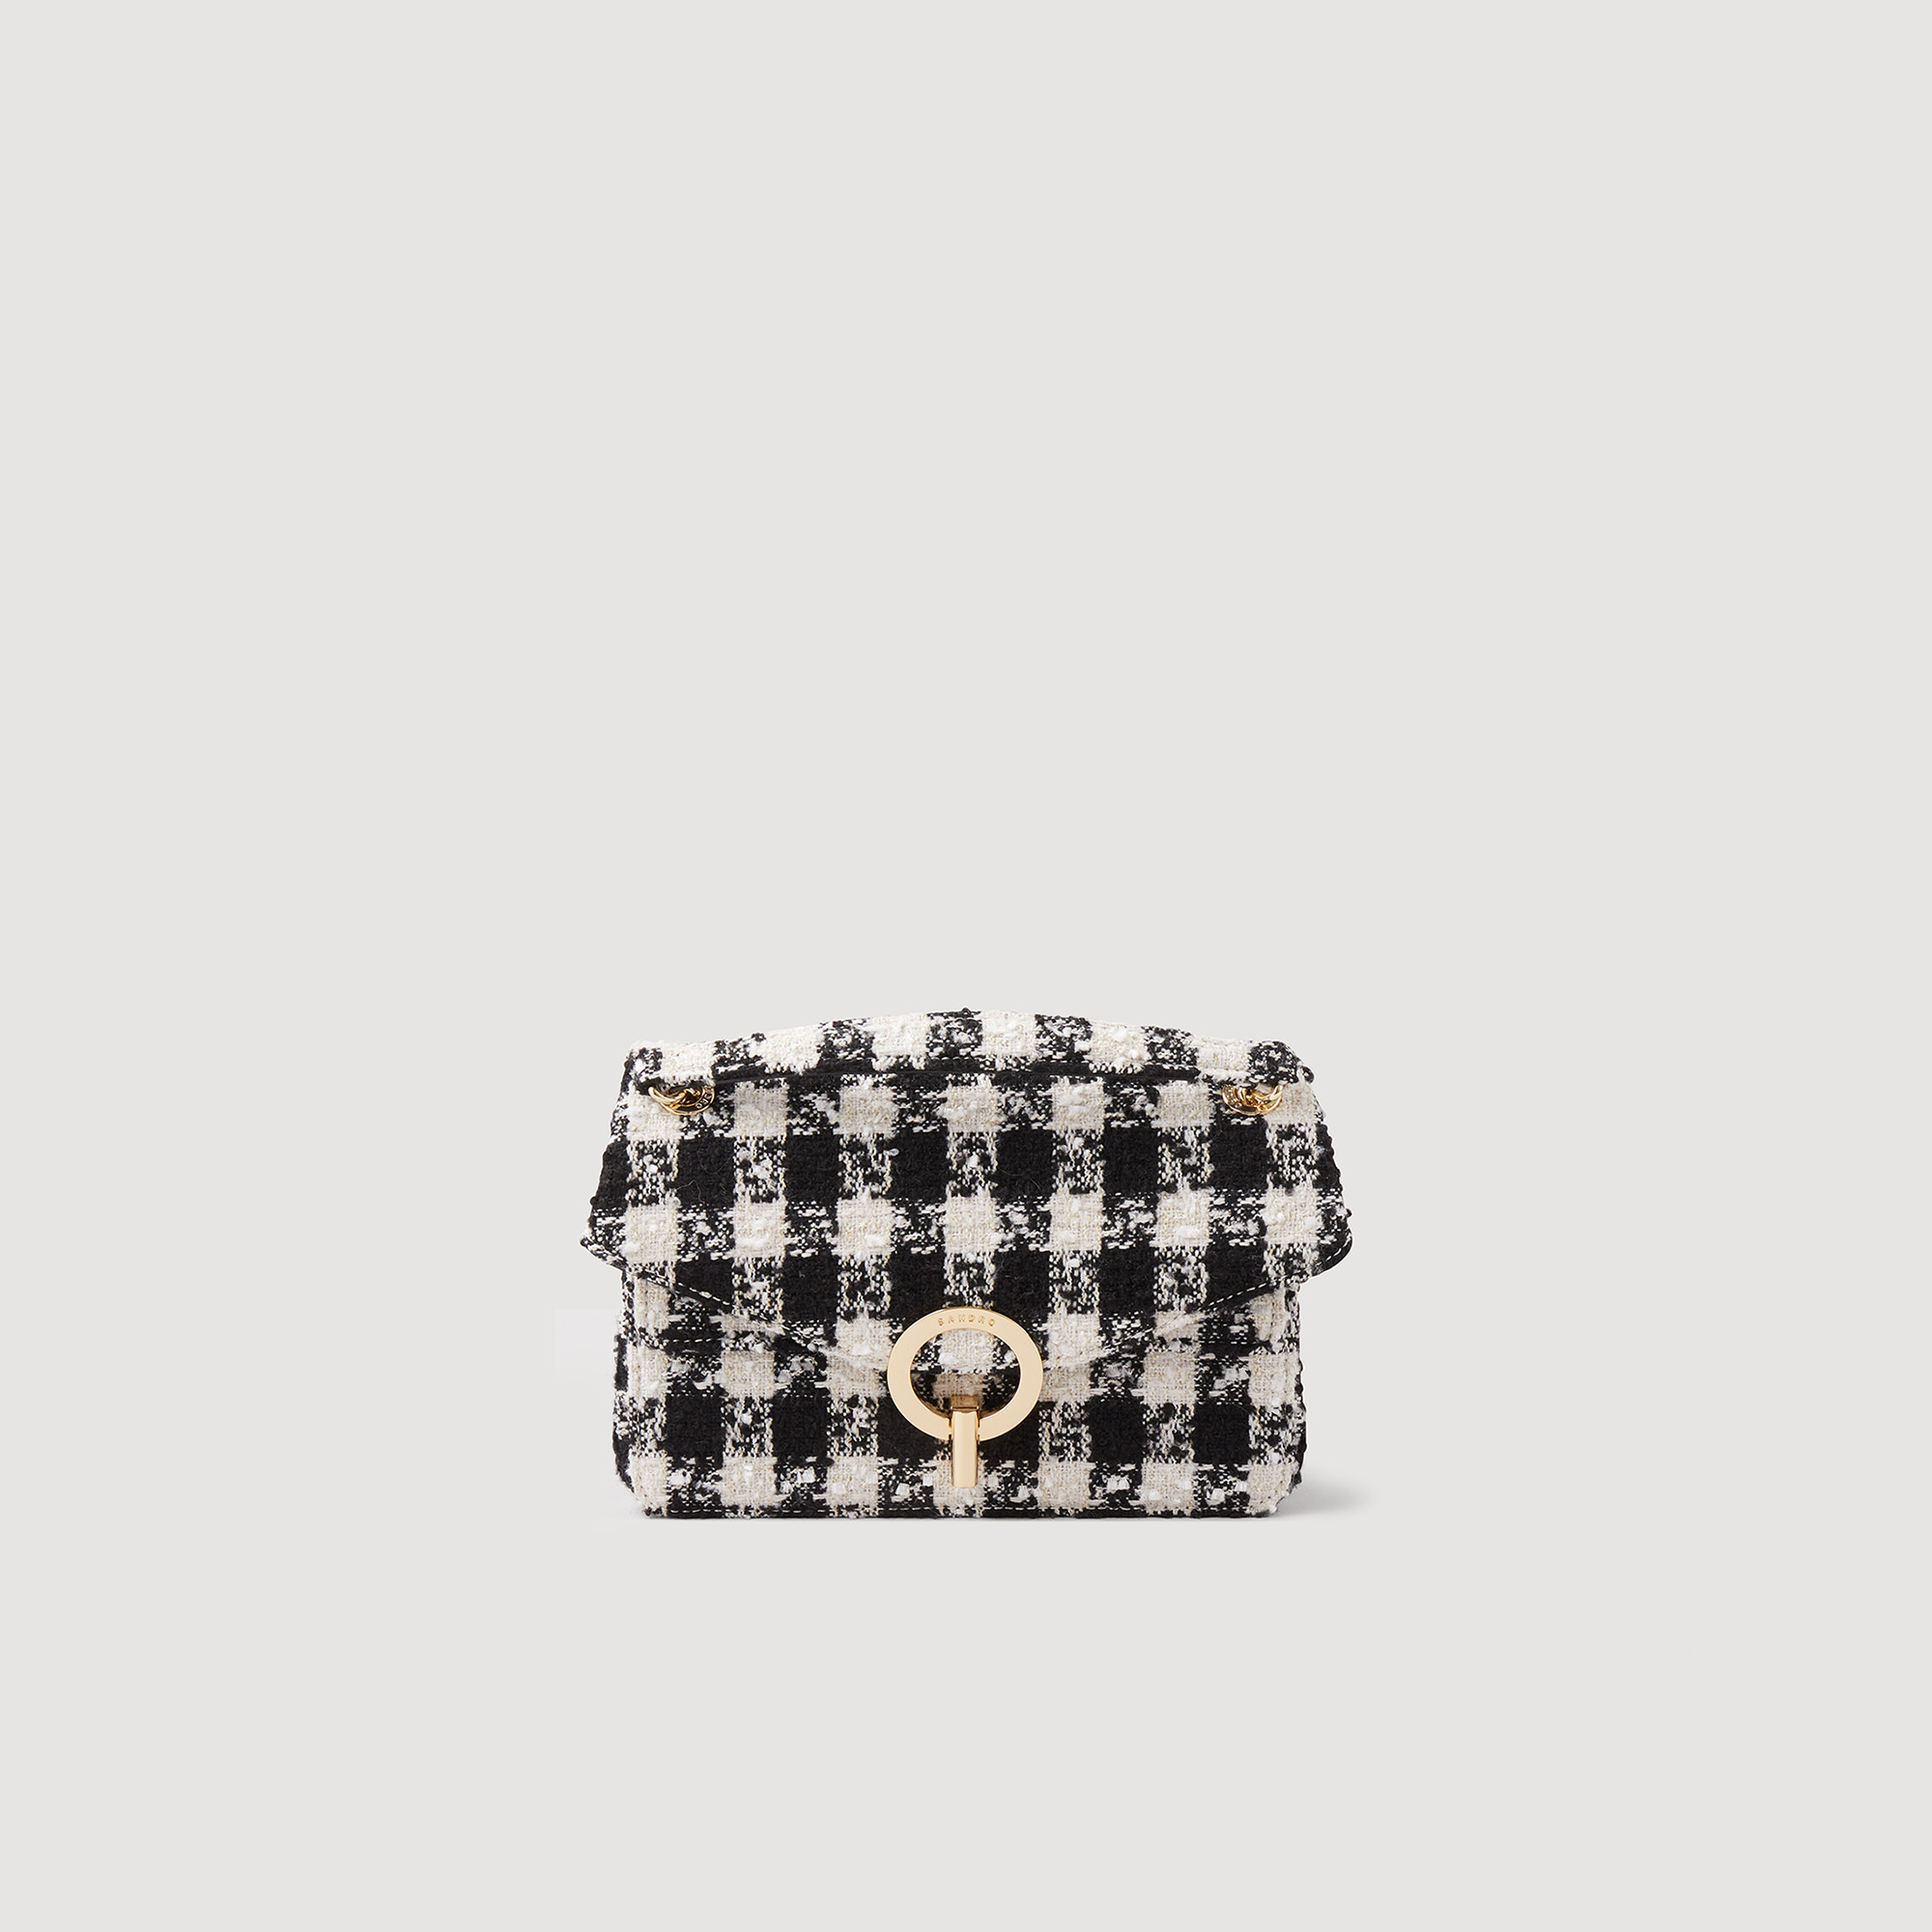 Sandro polyester The iconic Yza Bag in houndstooth tweed